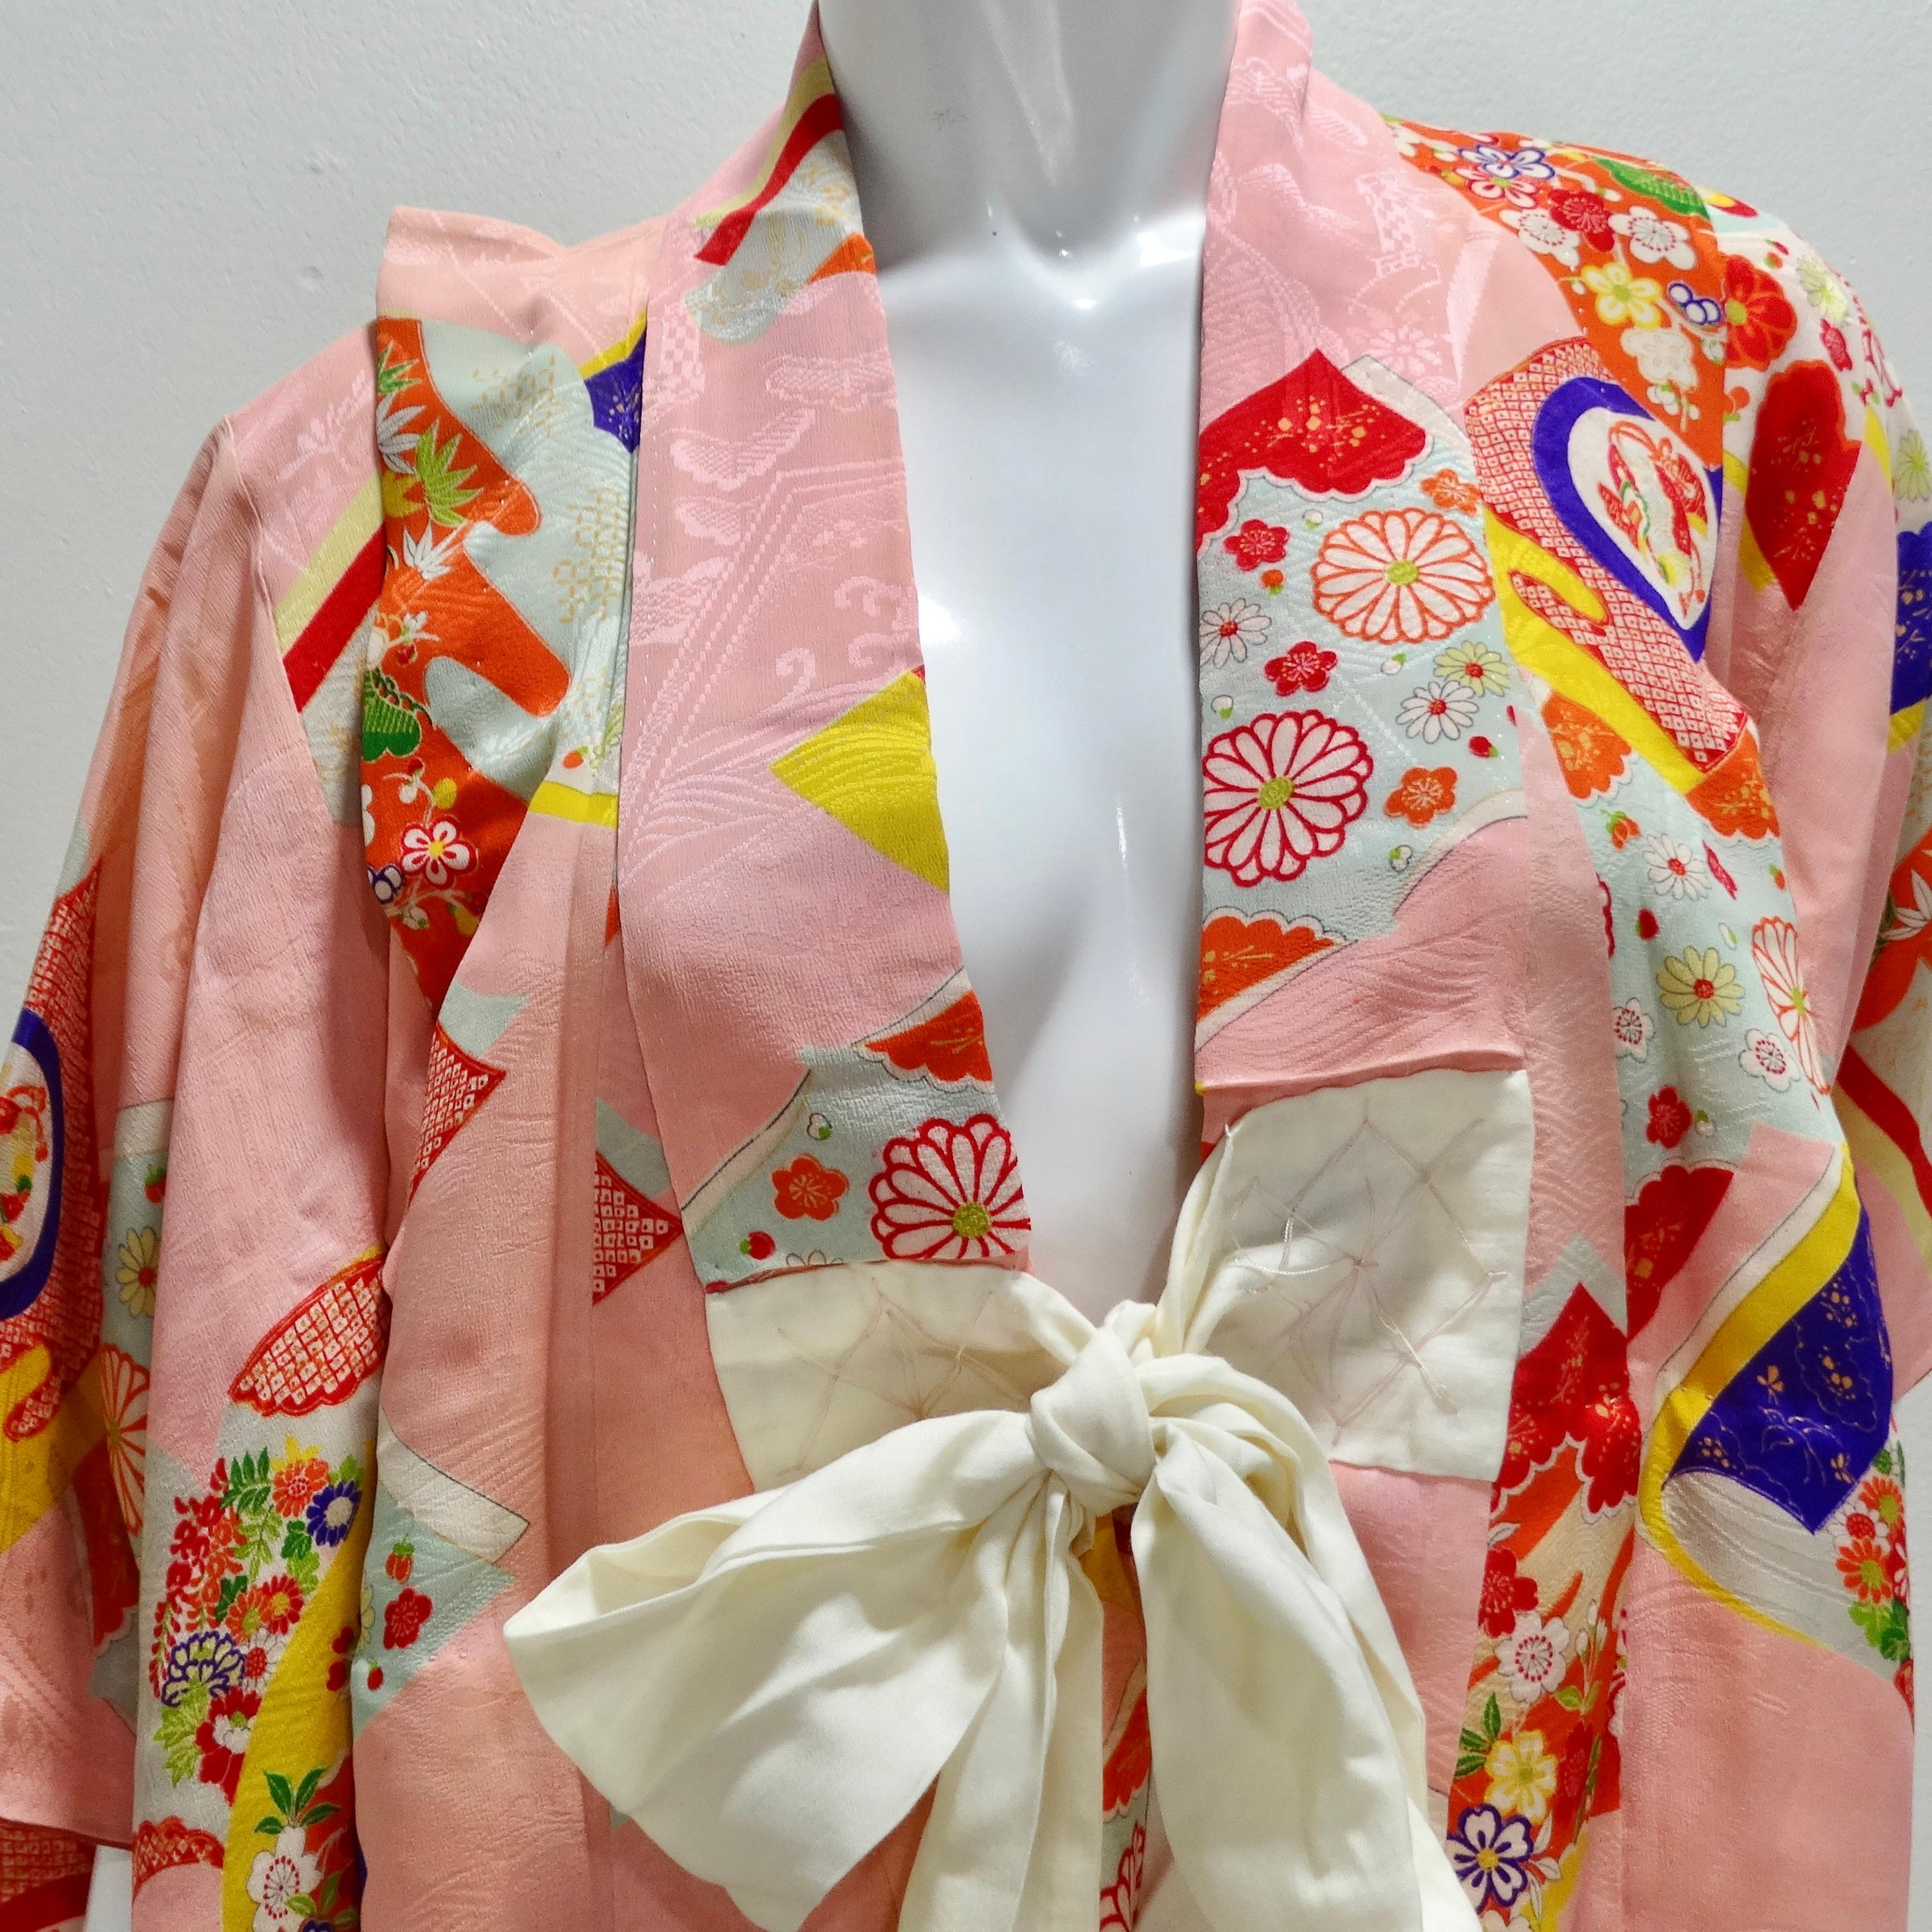 Introducing the 1970s Handmade Japanese Multicolor Silk Kimono—an exquisite and whimsical treasure that captures the essence of traditional Japanese artistry and craftsmanship. This handmade kimono is more than a garment; it's a wearable canvas of